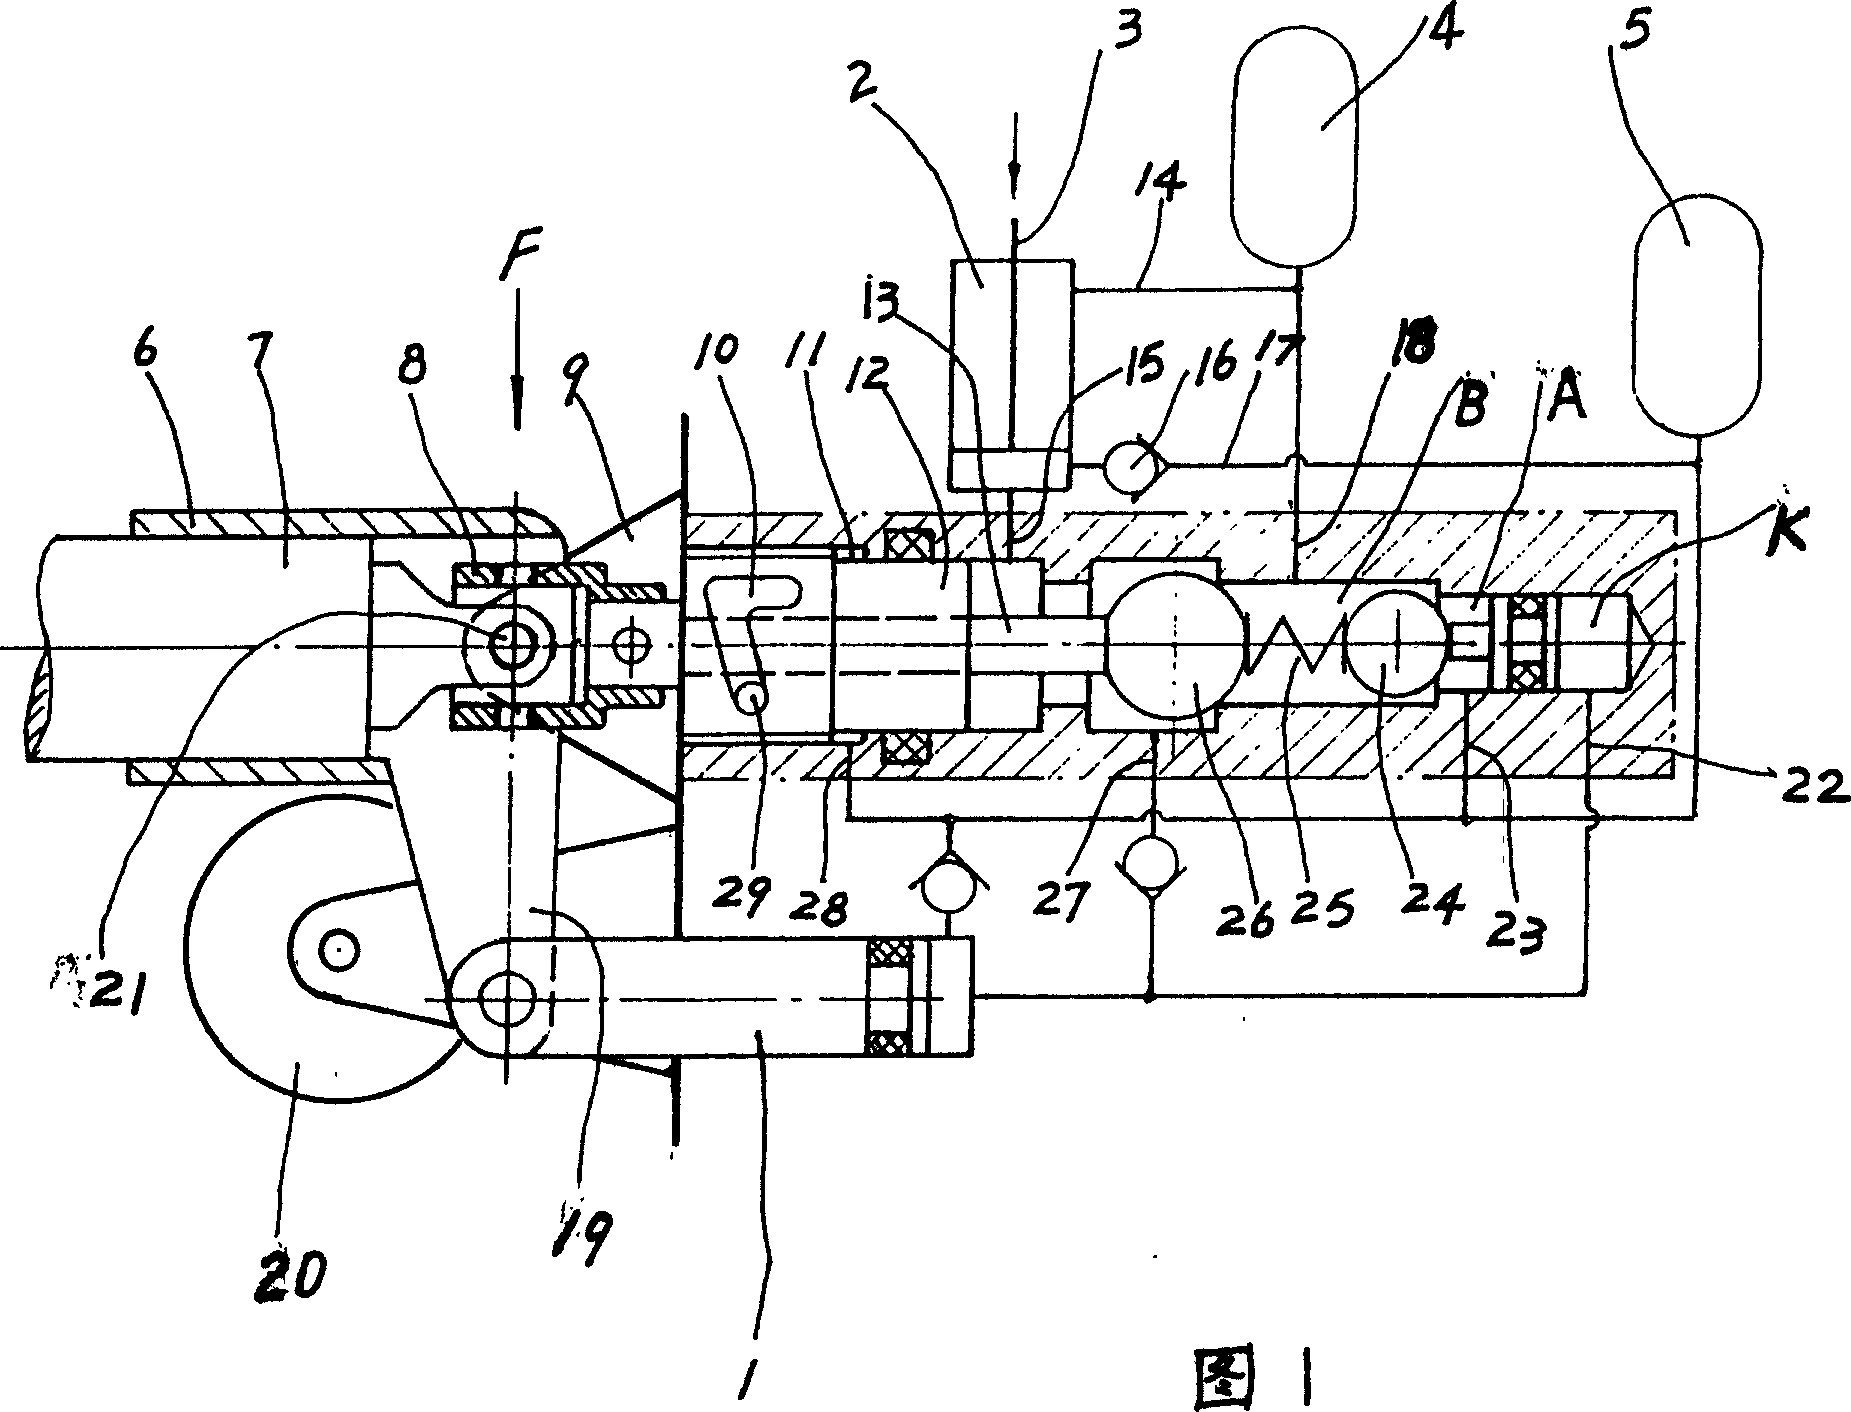 Replicating position arrival hydraulic machine controlling device